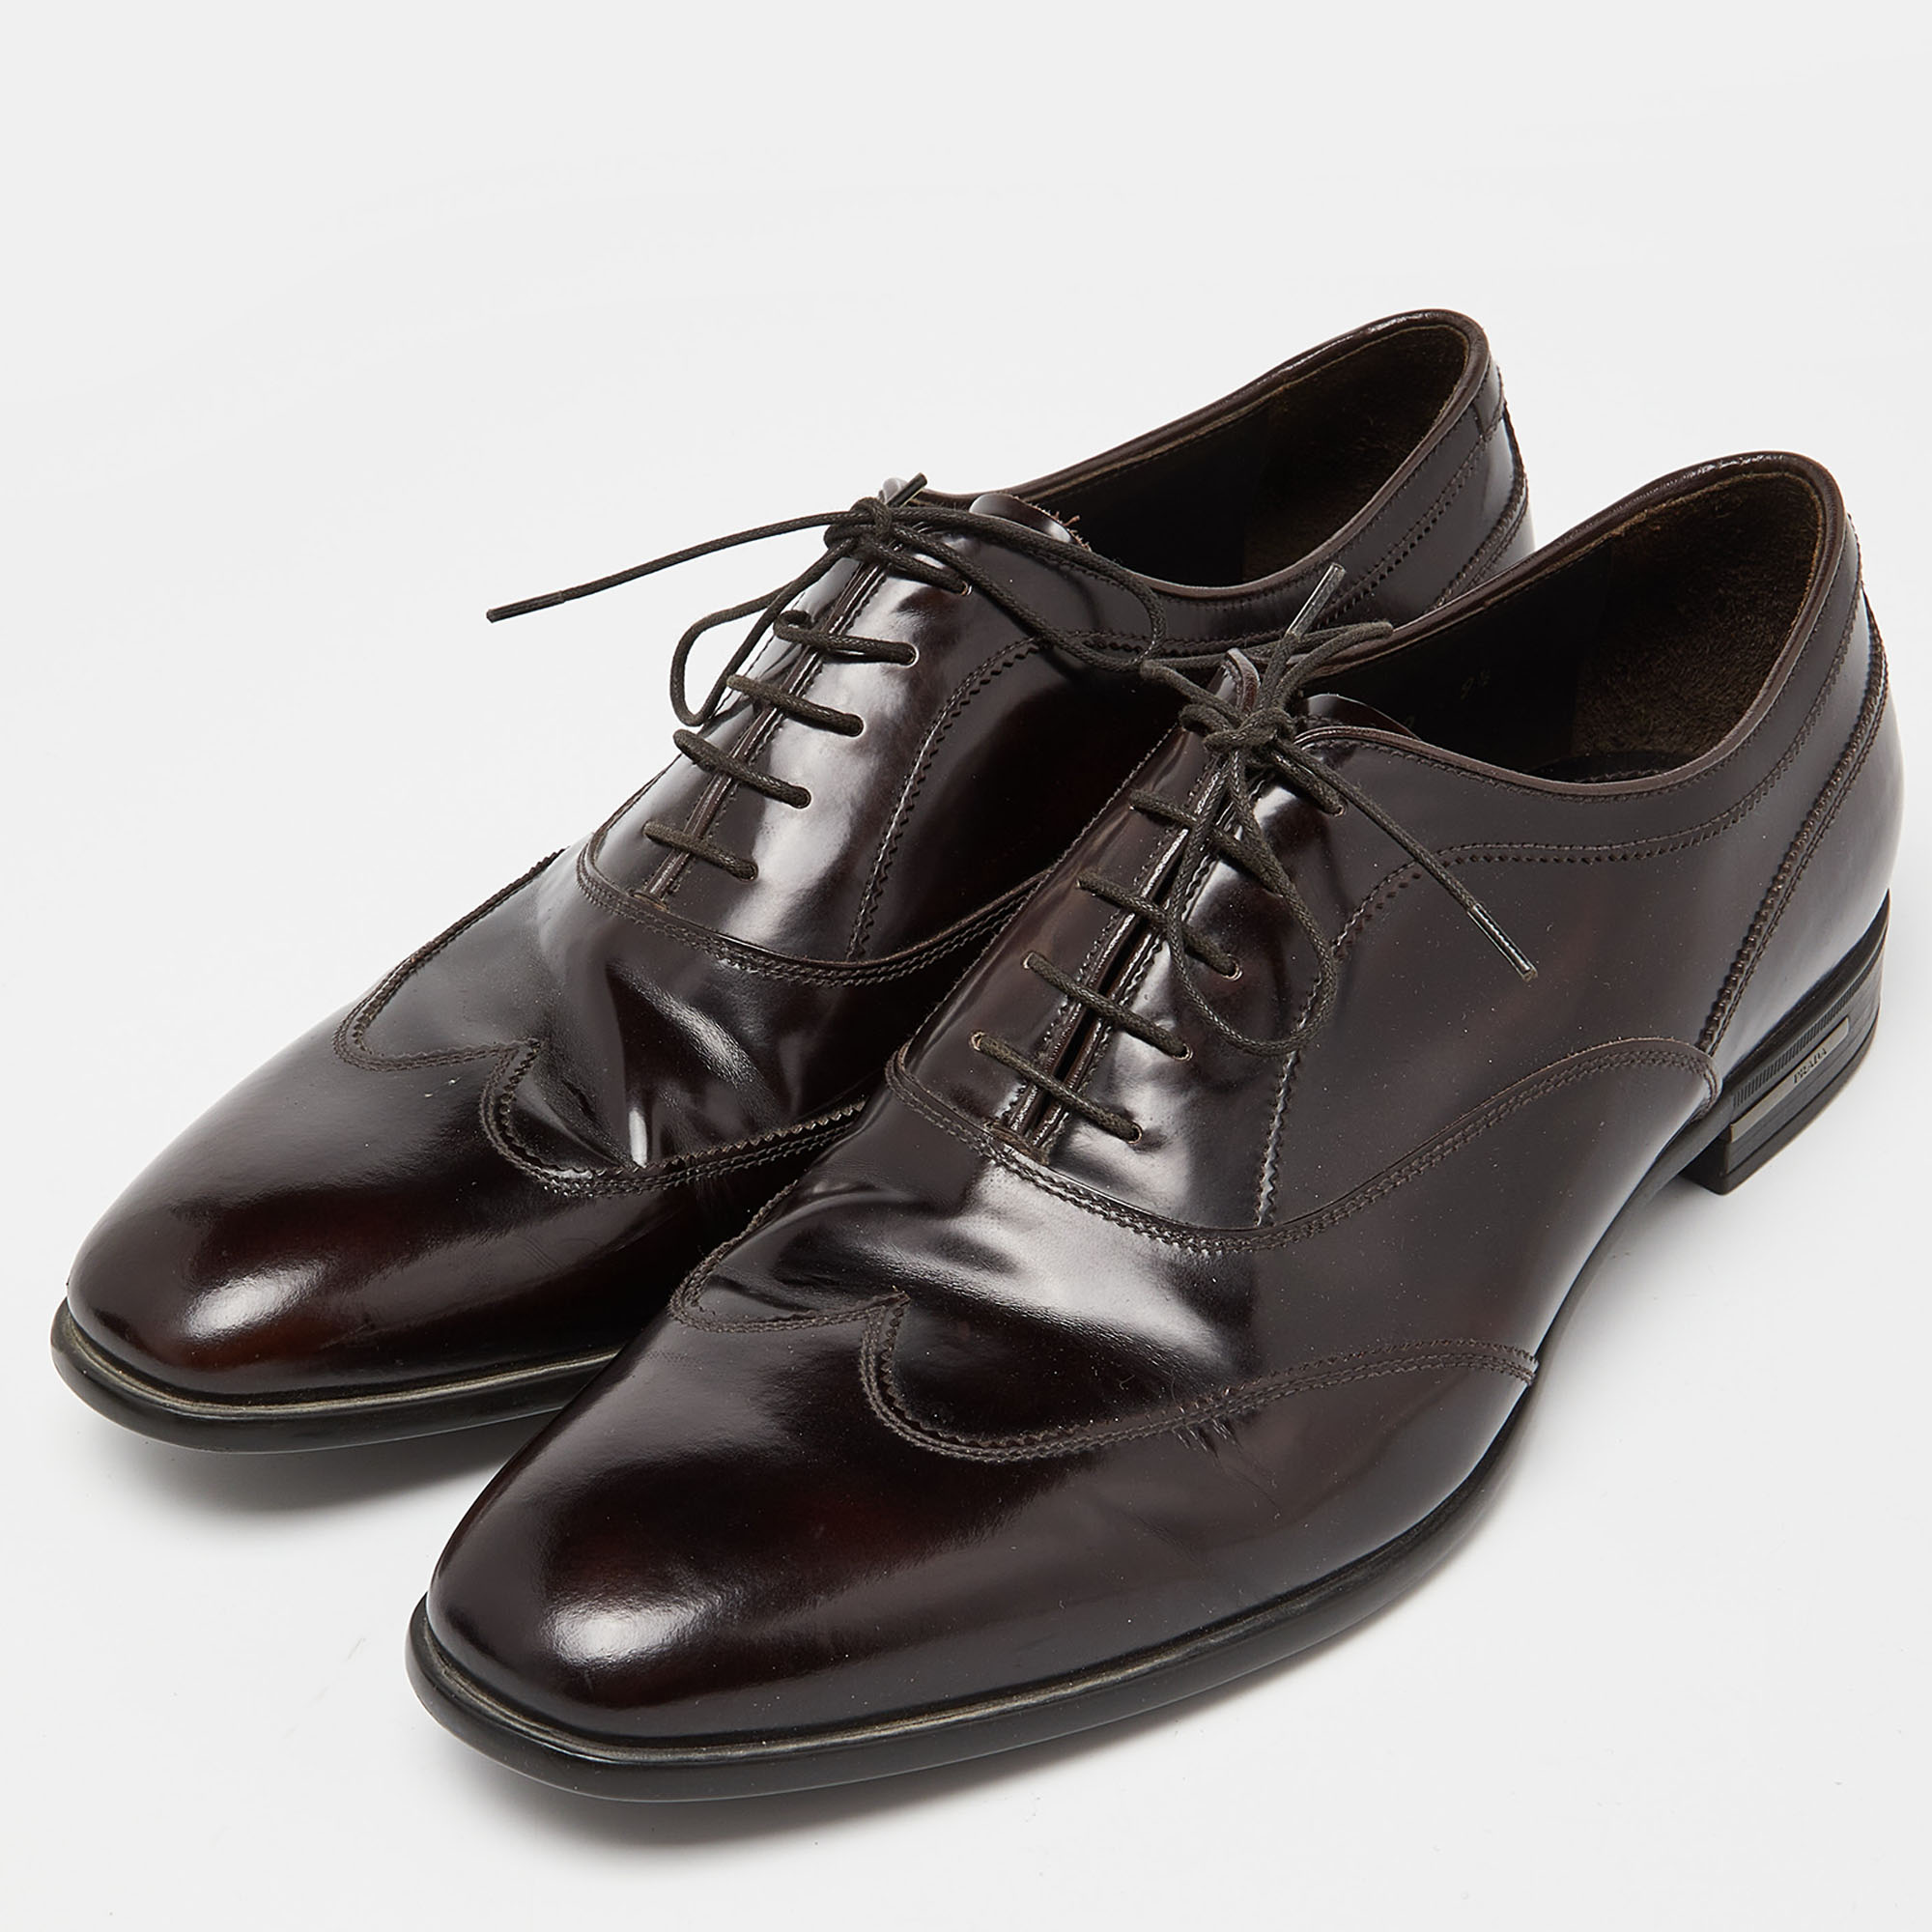 

Prada Brown Patent Leather Lace Up Oxfords Size